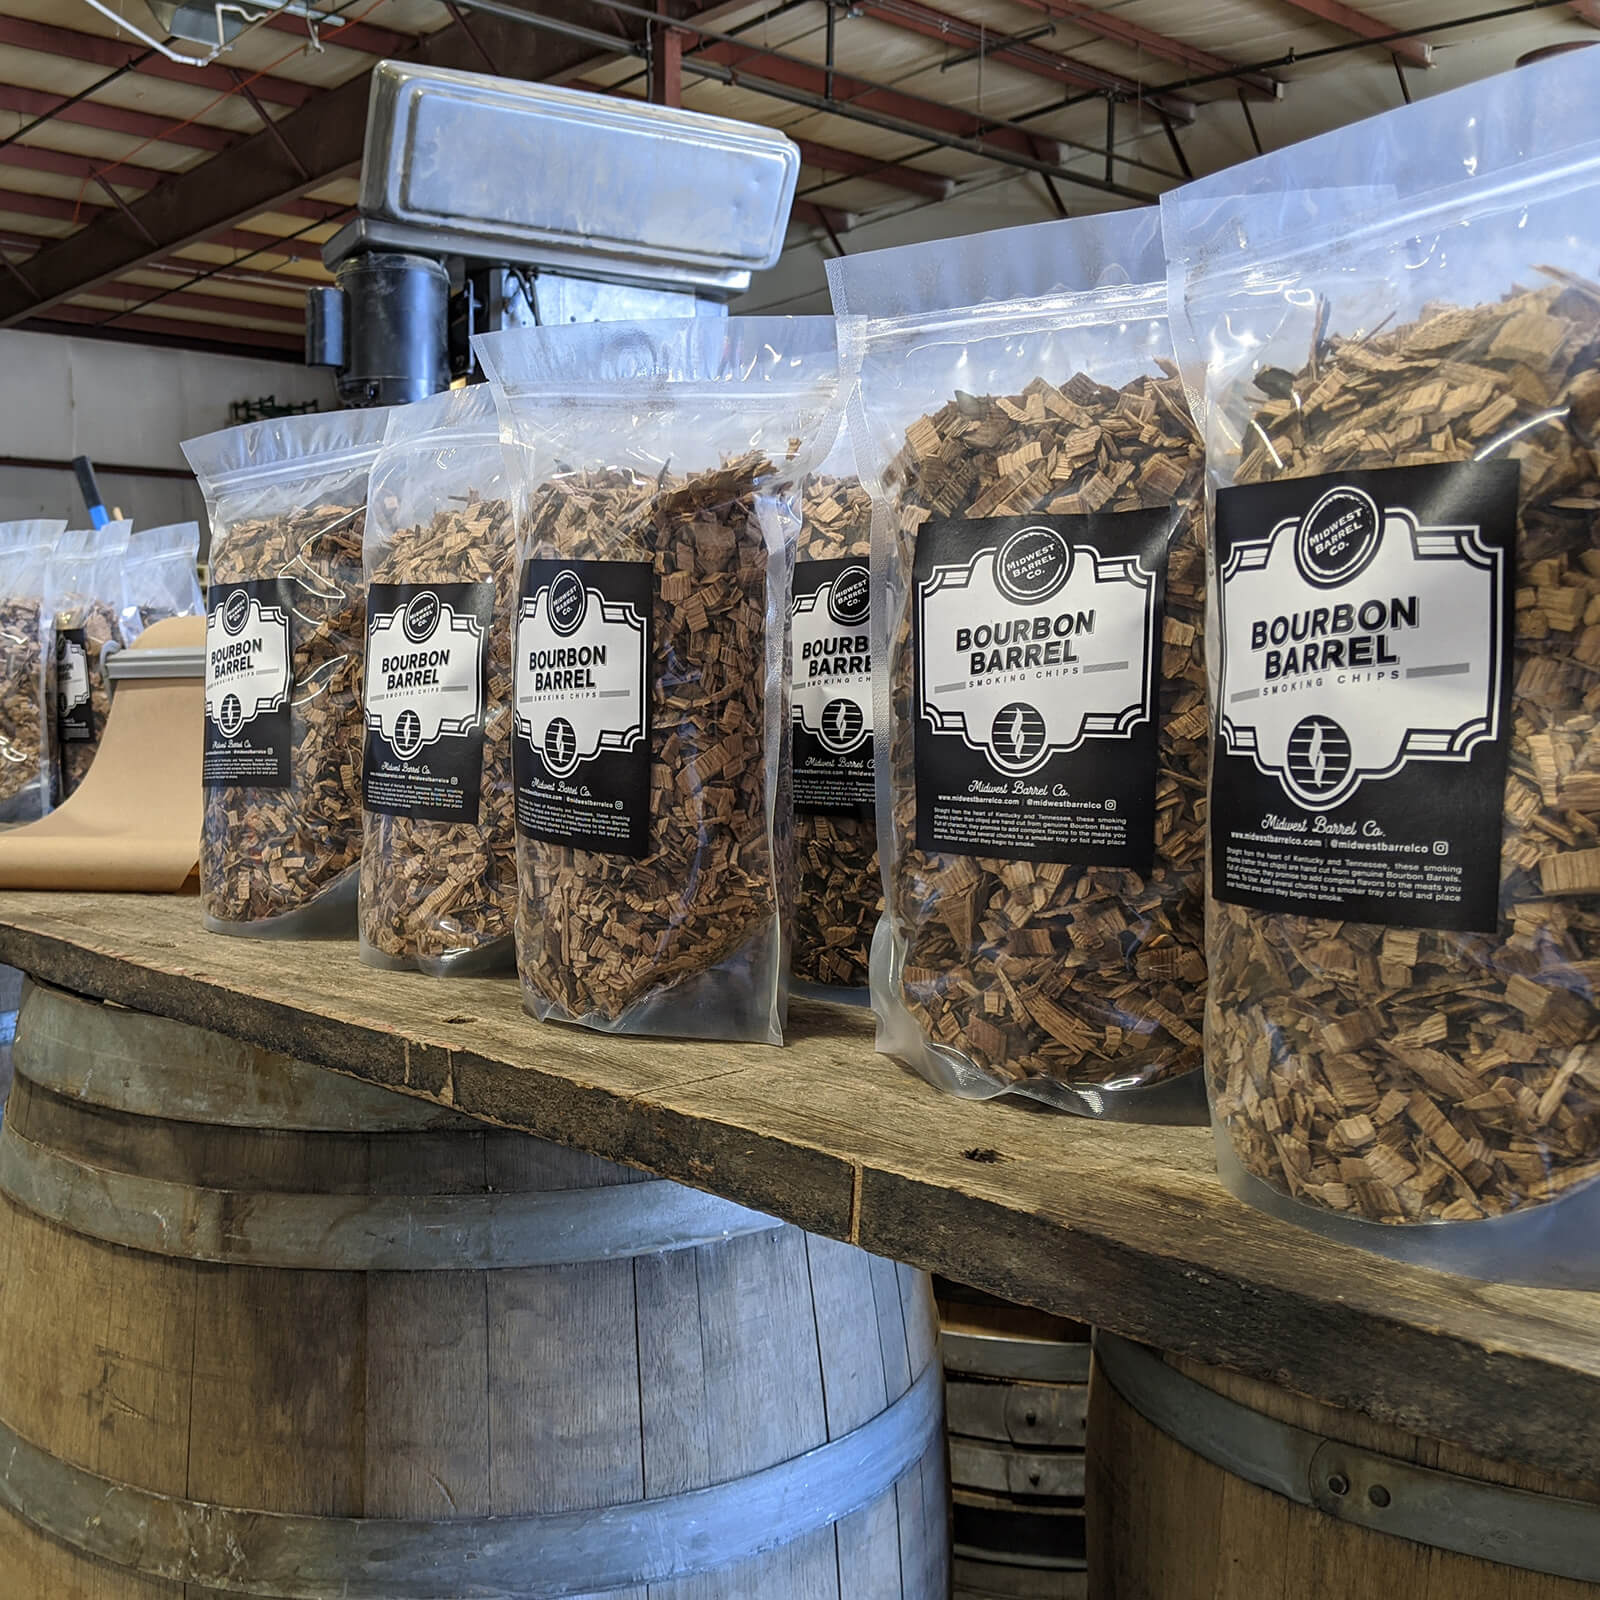 Bags of Bourbon Barrel BBQ Smoking Wood chips on table in warehouse